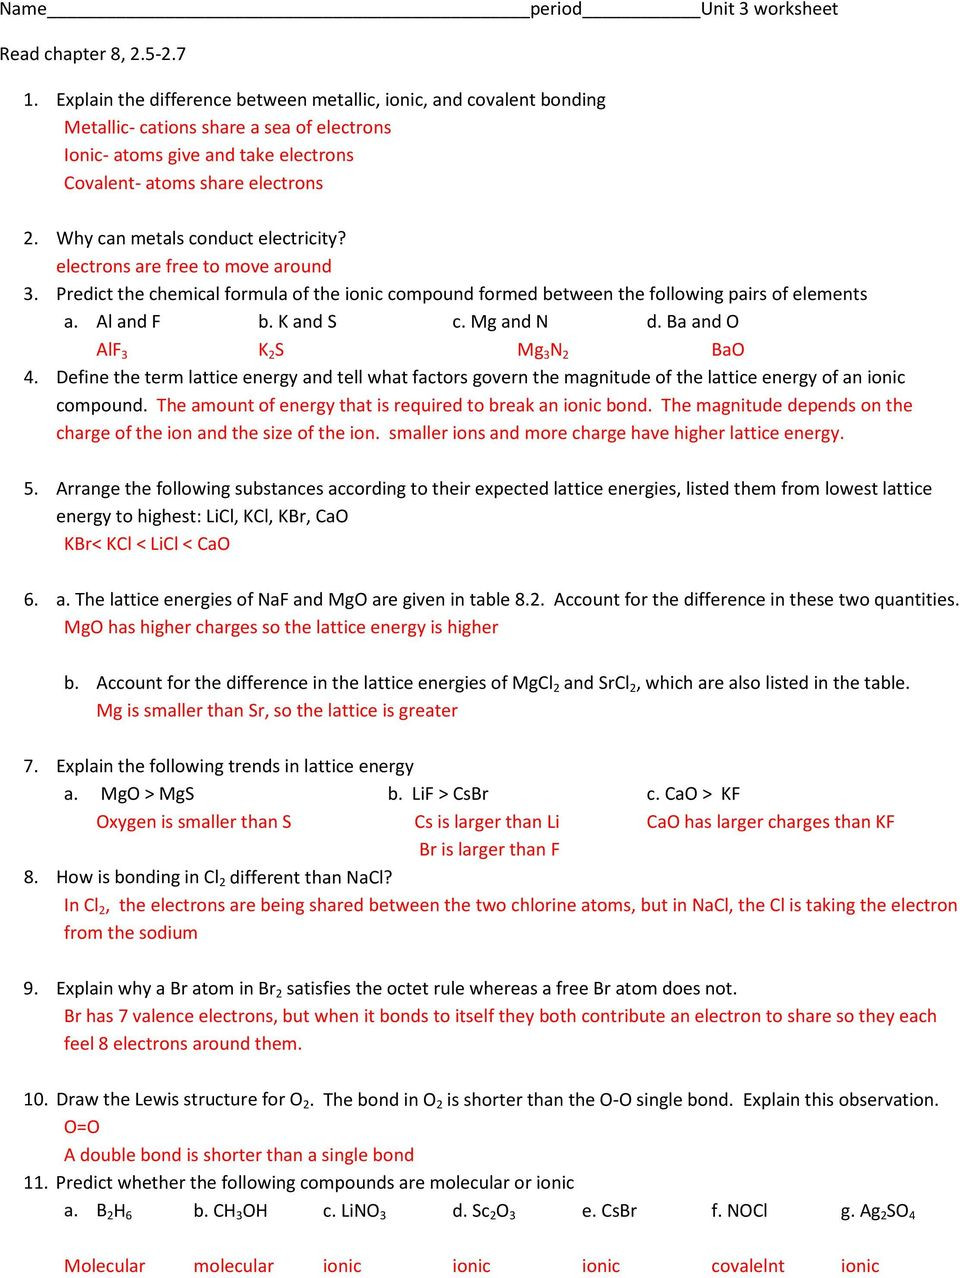 Ionic and Covalent Bonds Worksheet Name Period Unit 3 Worksheet Pdf Free Download